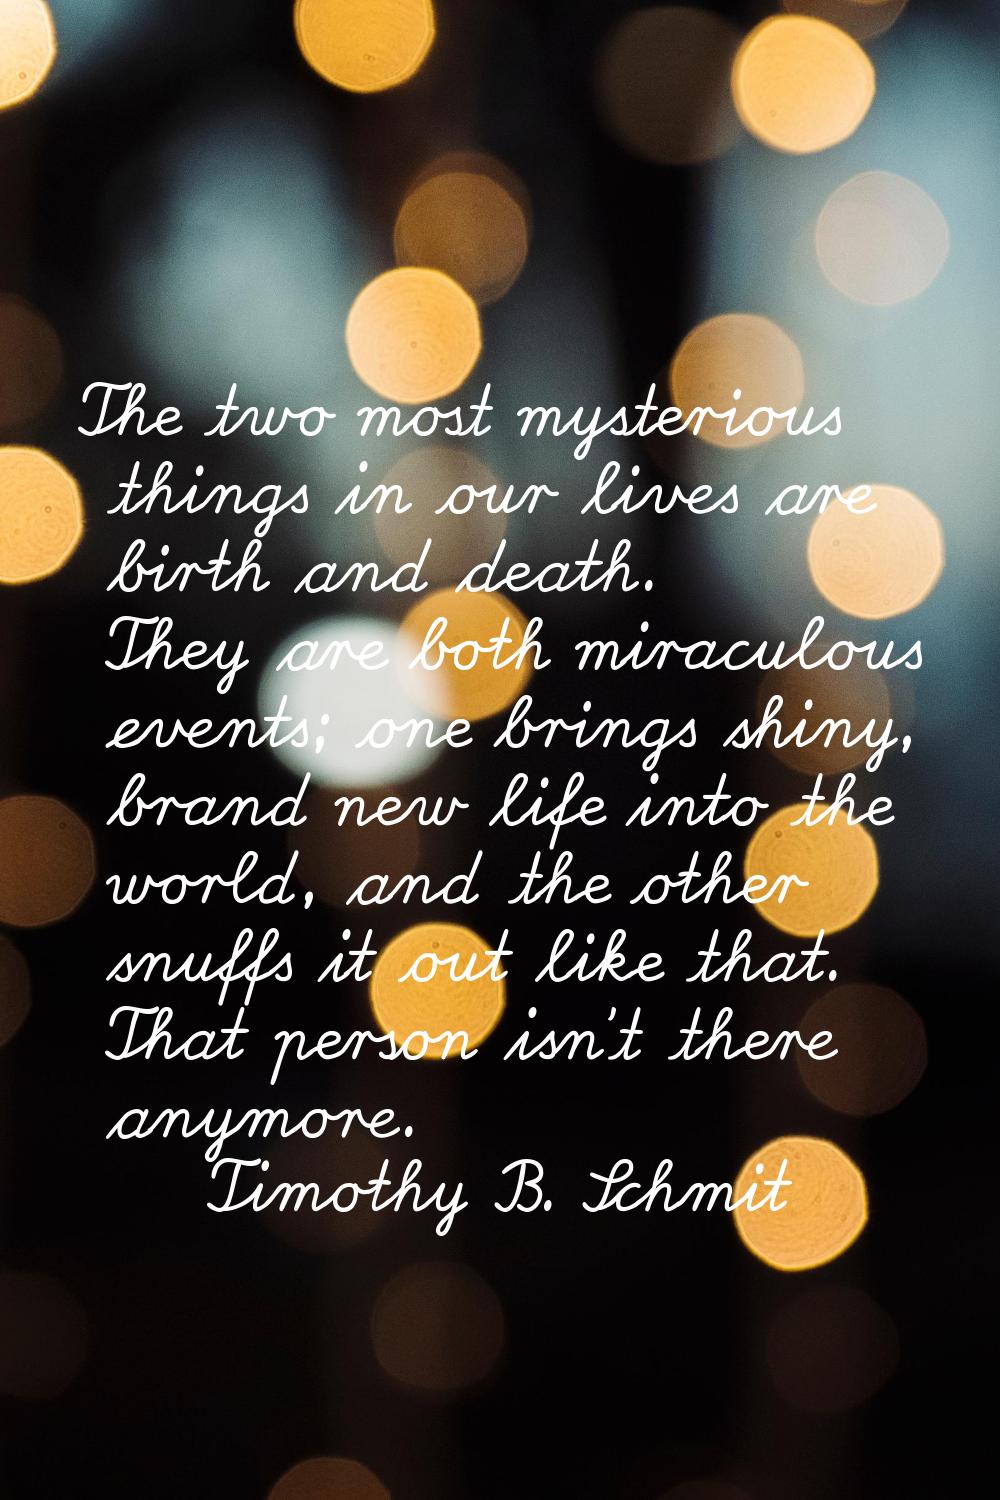 The two most mysterious things in our lives are birth and death. They are both miraculous events; o